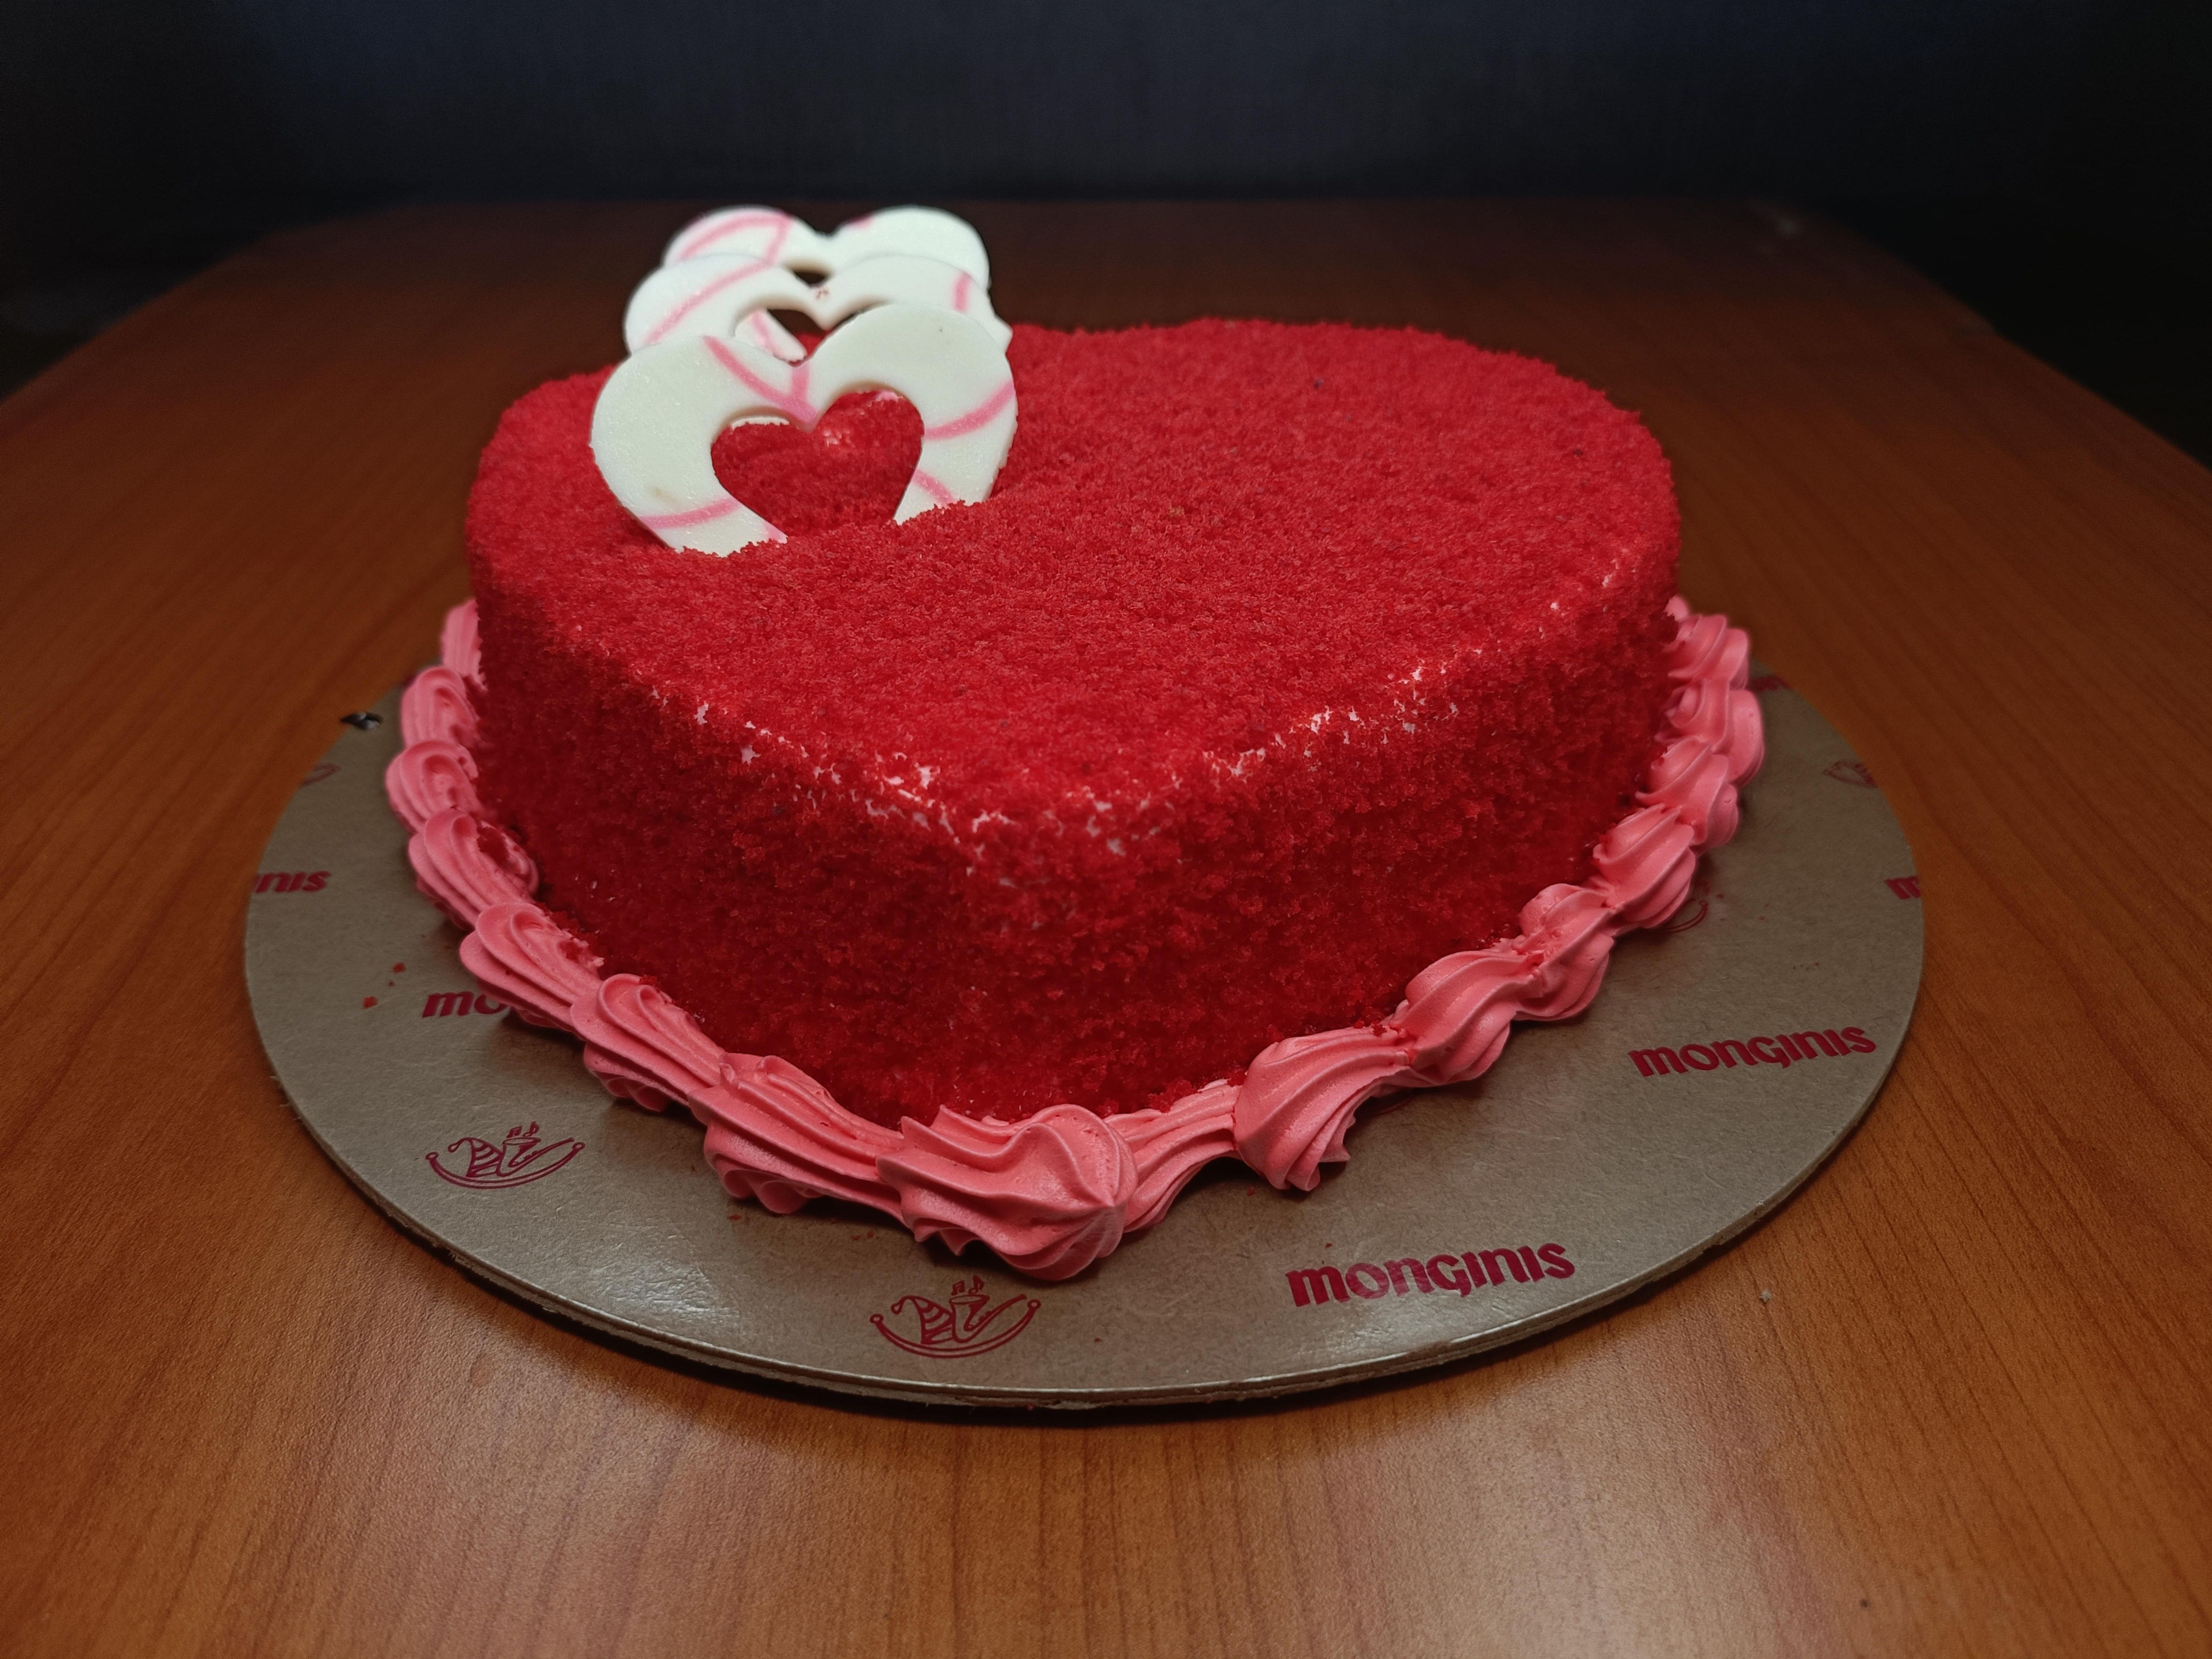 Monginis Cake Shop - Thane - Relish every minute of your special day with  Monginis special customized cake🎂! Order your dream cake at your Monginis,  #monginiscakesthane ✓Wedding Cake ✓Engagement Cake ✓Anniversary Cake